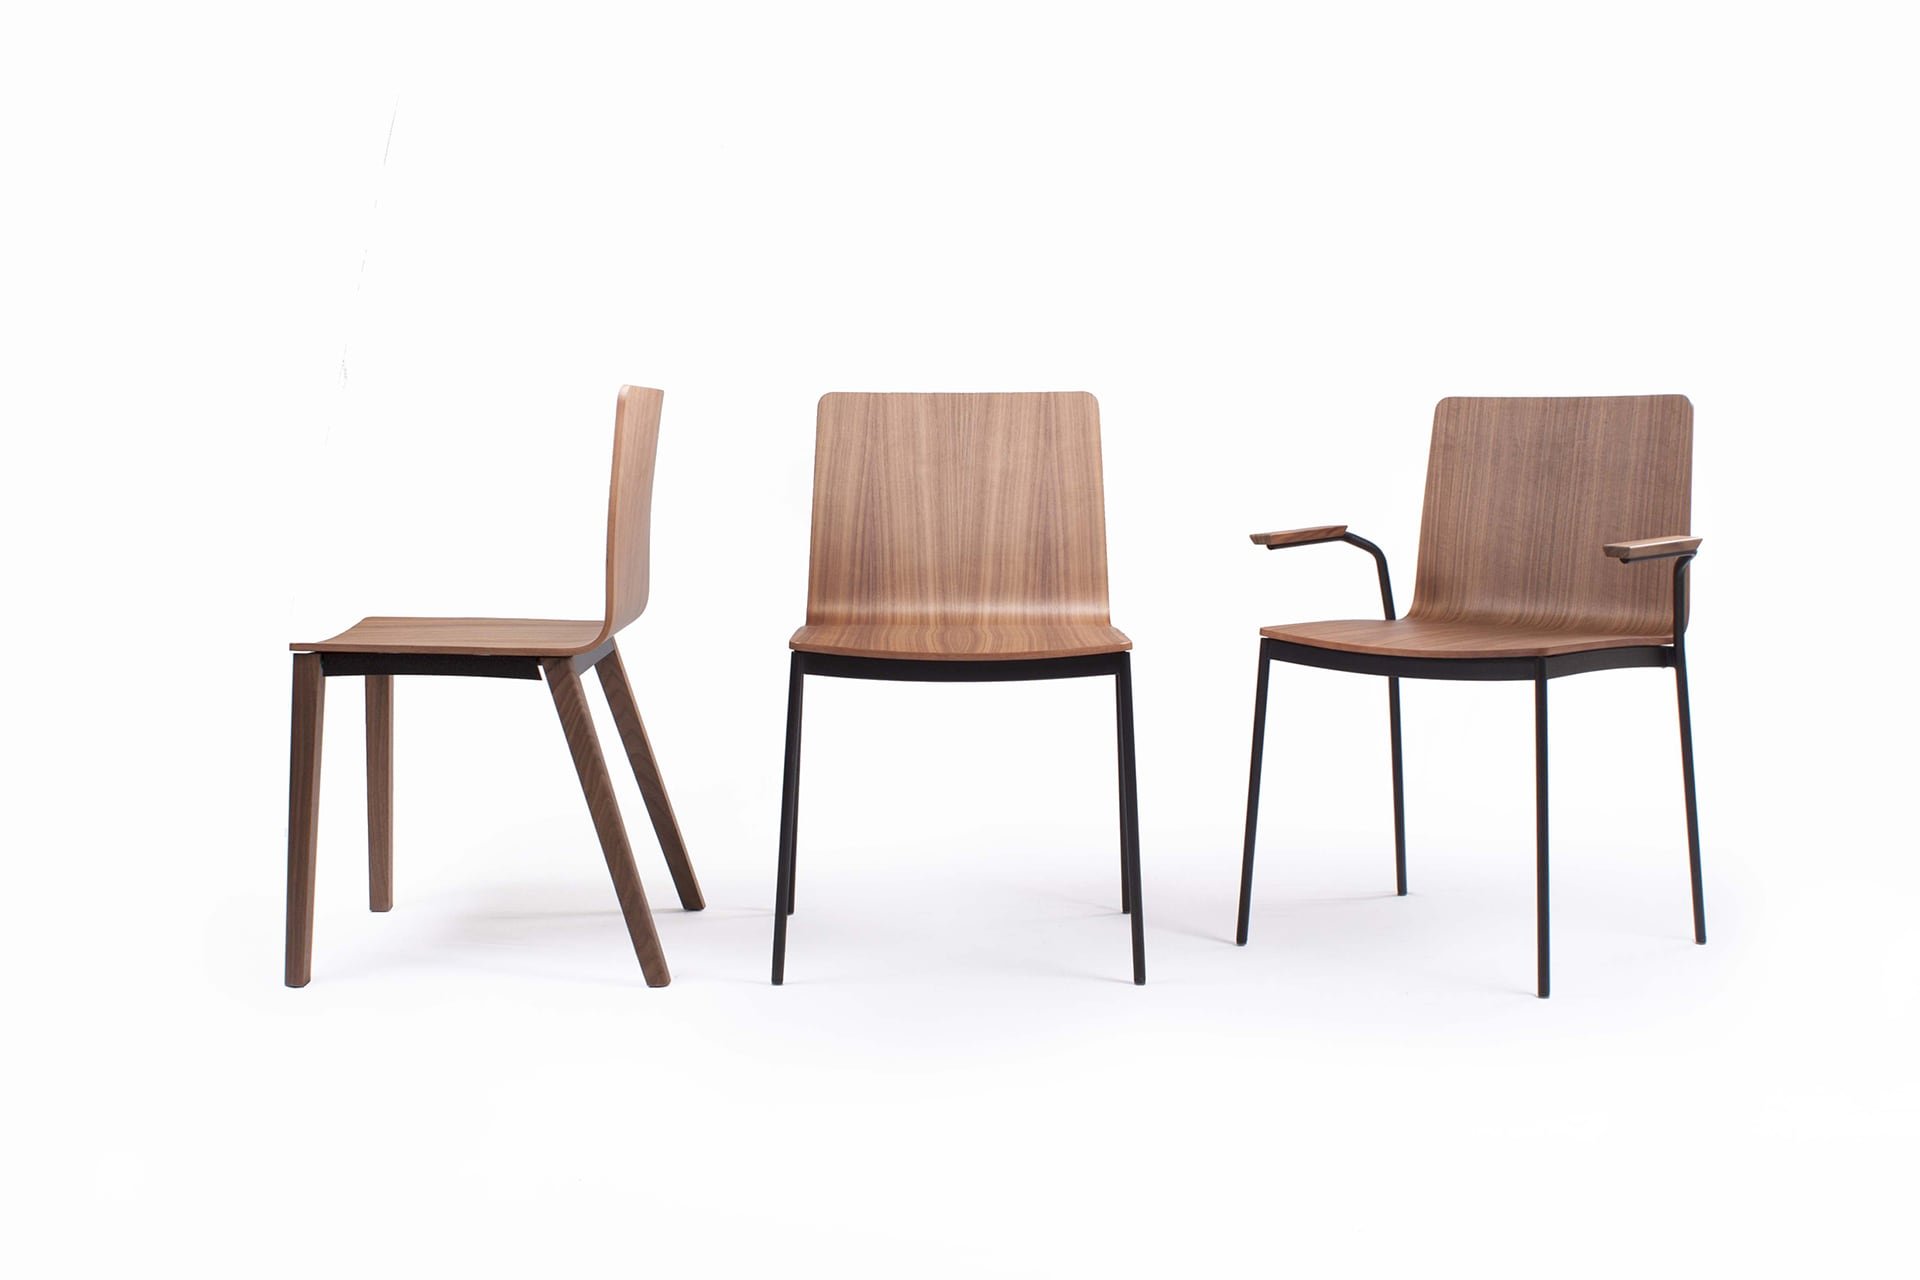 Tyris Dining Chair from Punt Mobles, designed by Odosdesign